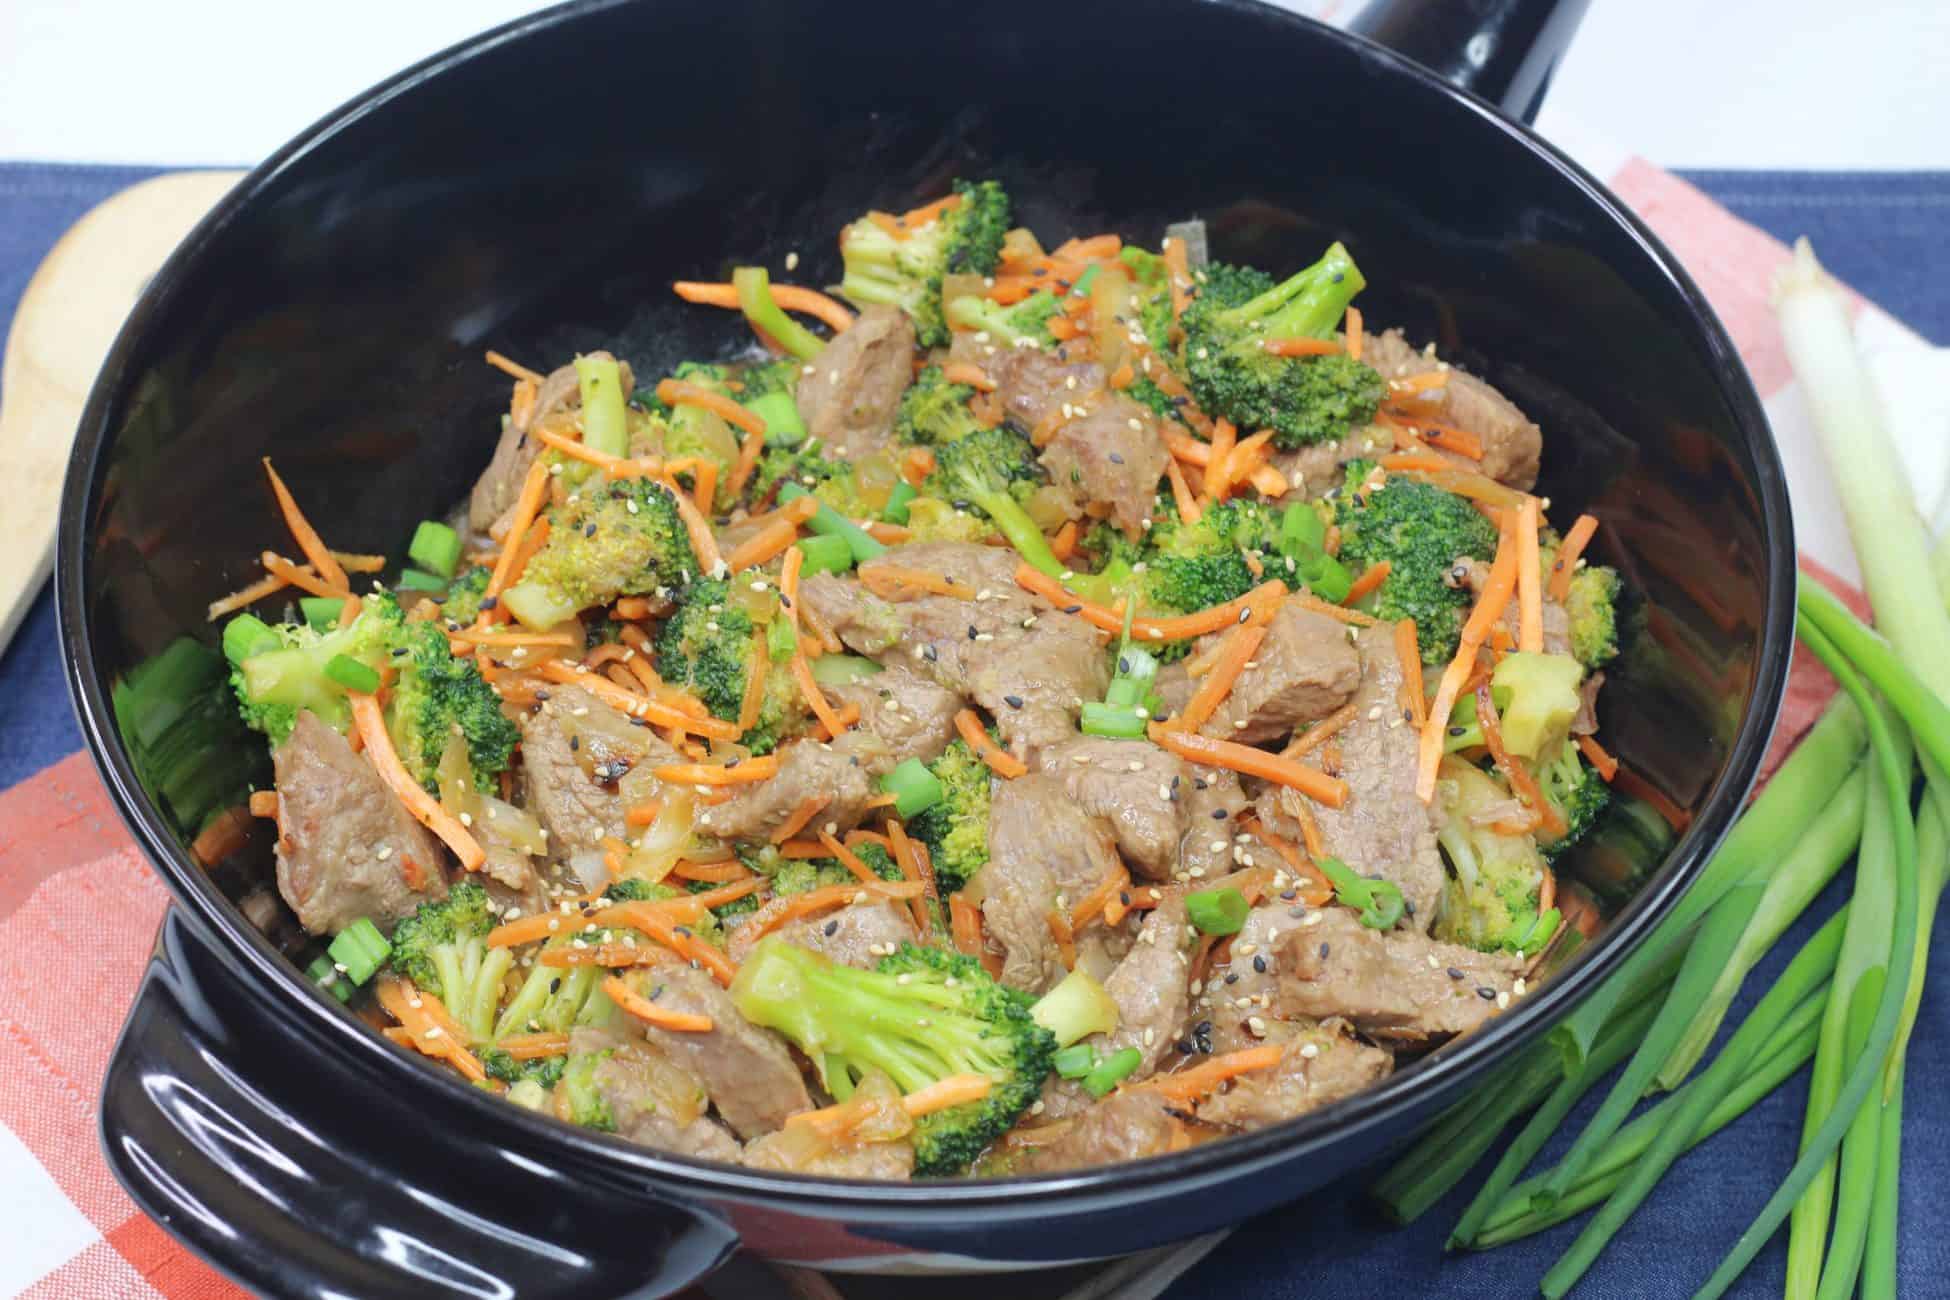 Easy Beef and Broccoli